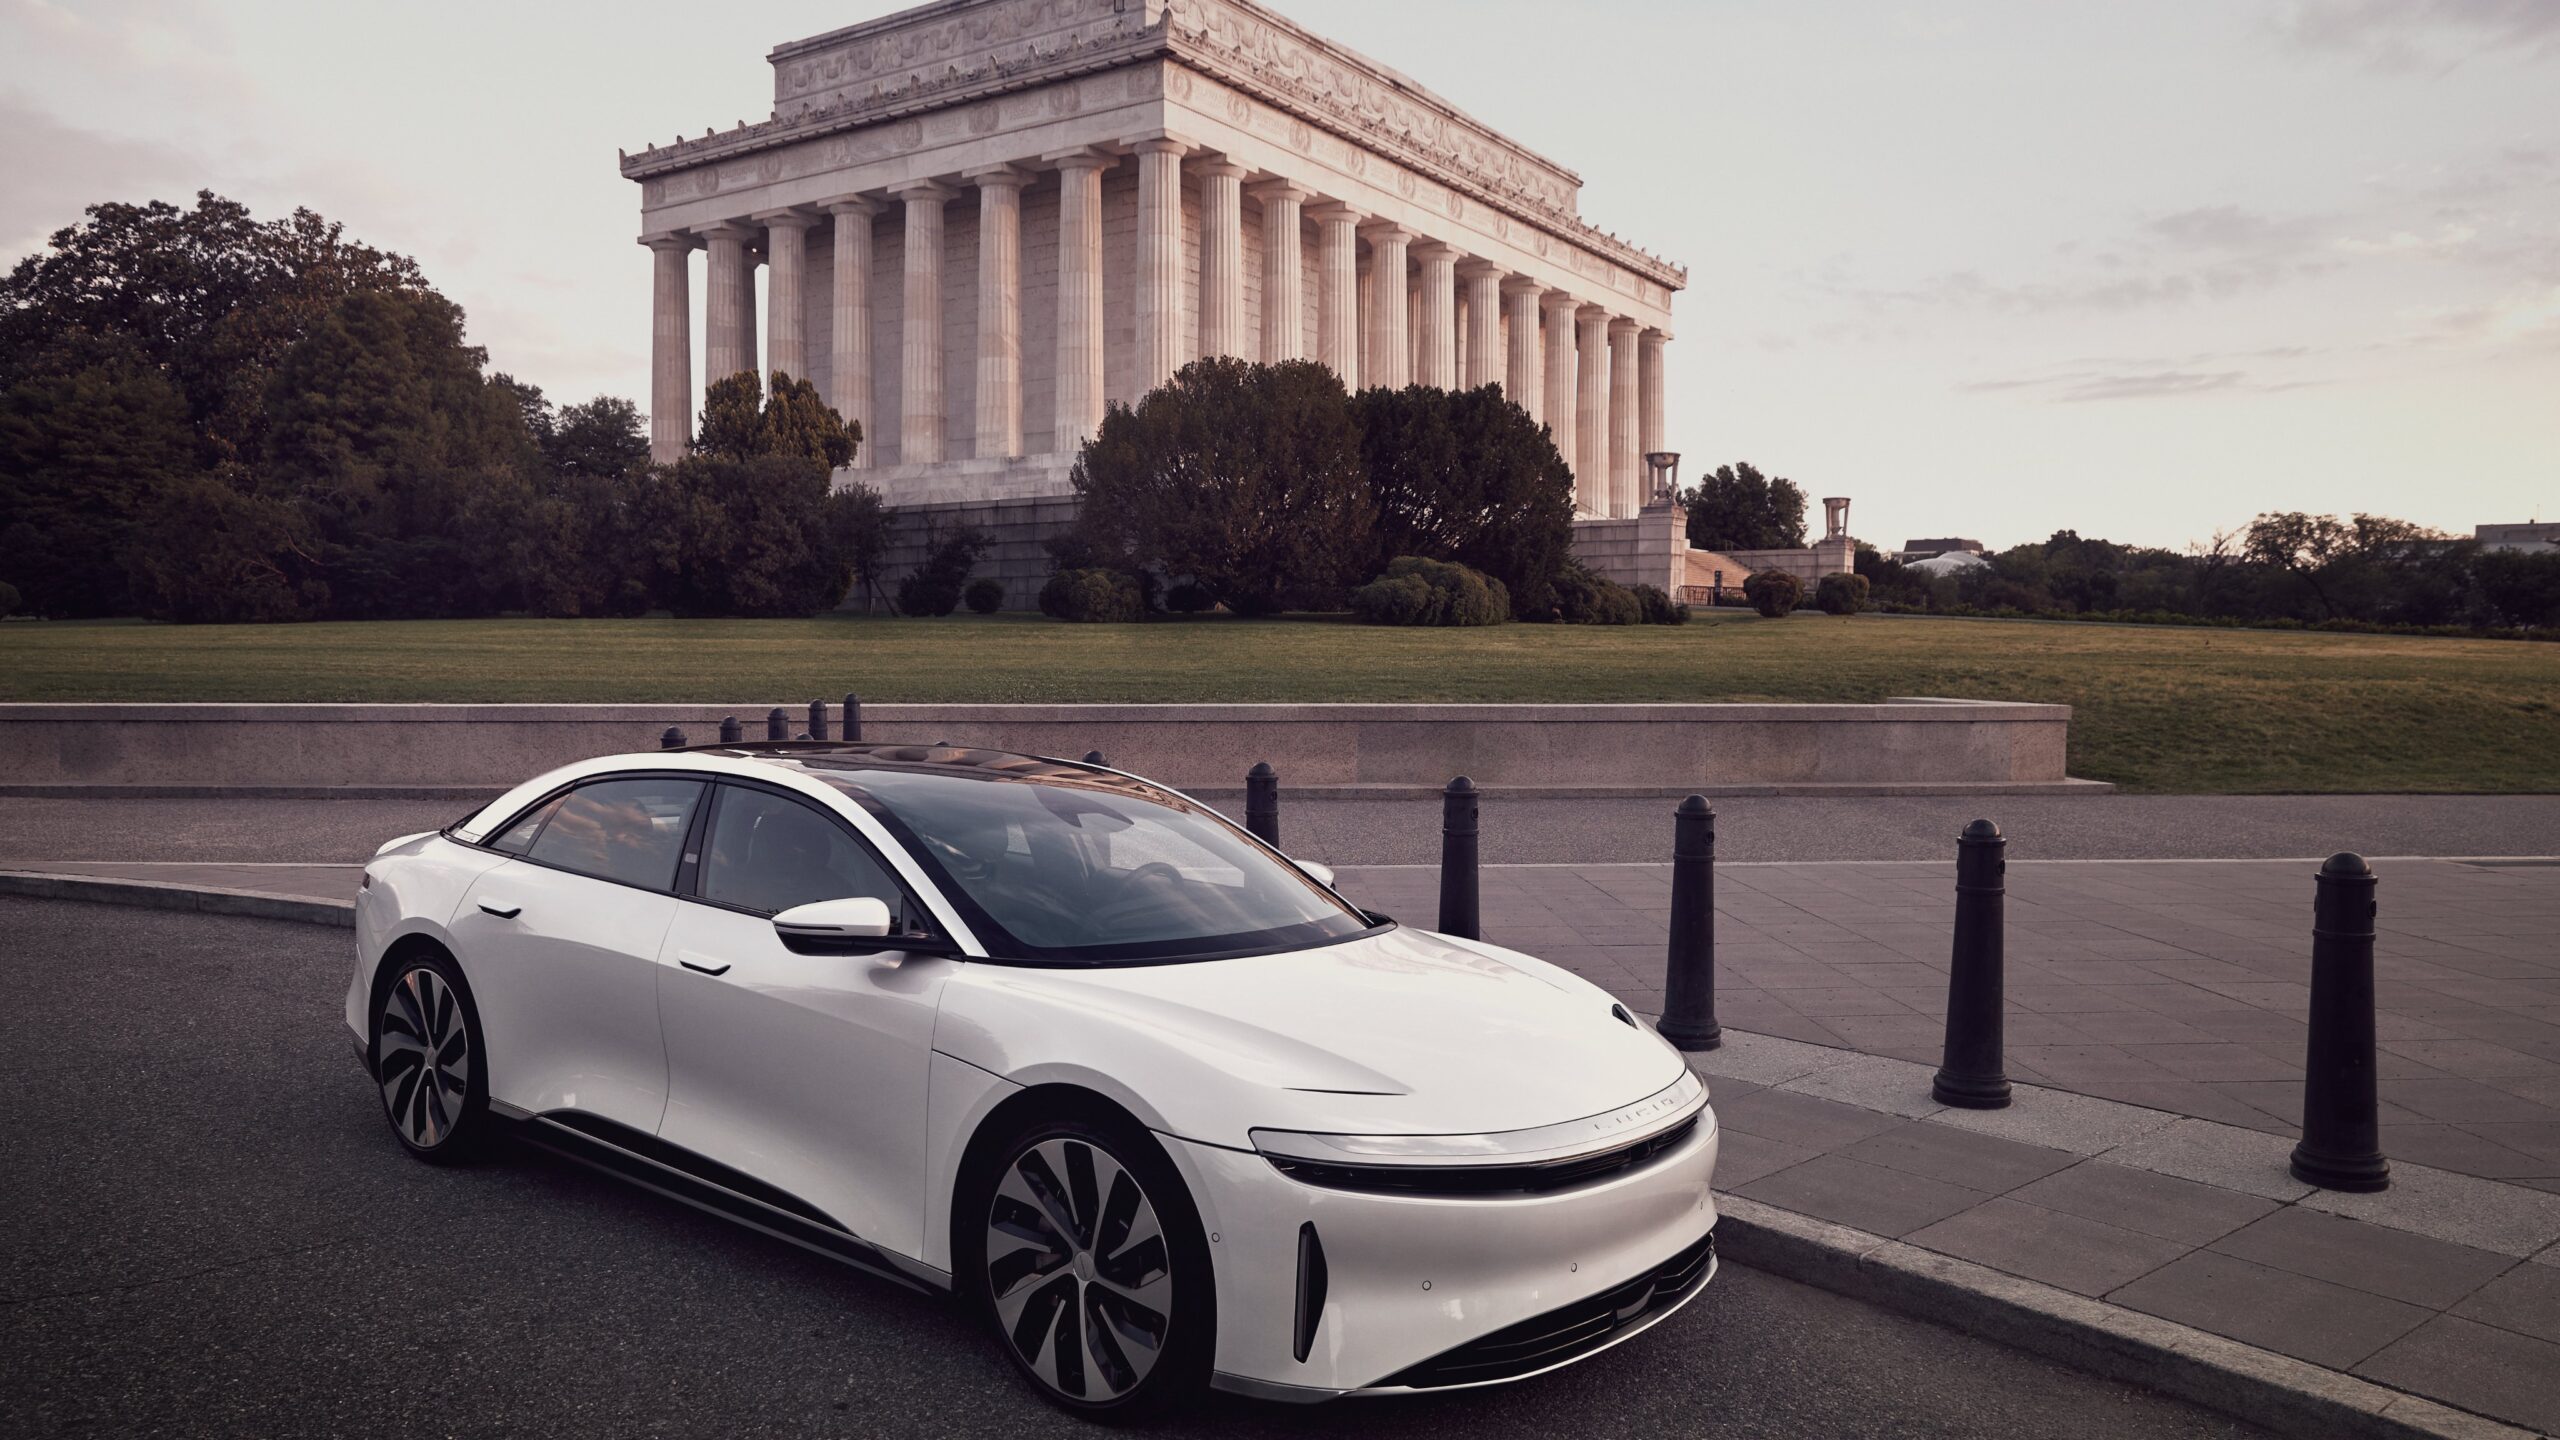 Lucid Motors Wishing All A Happy Fourth Of July